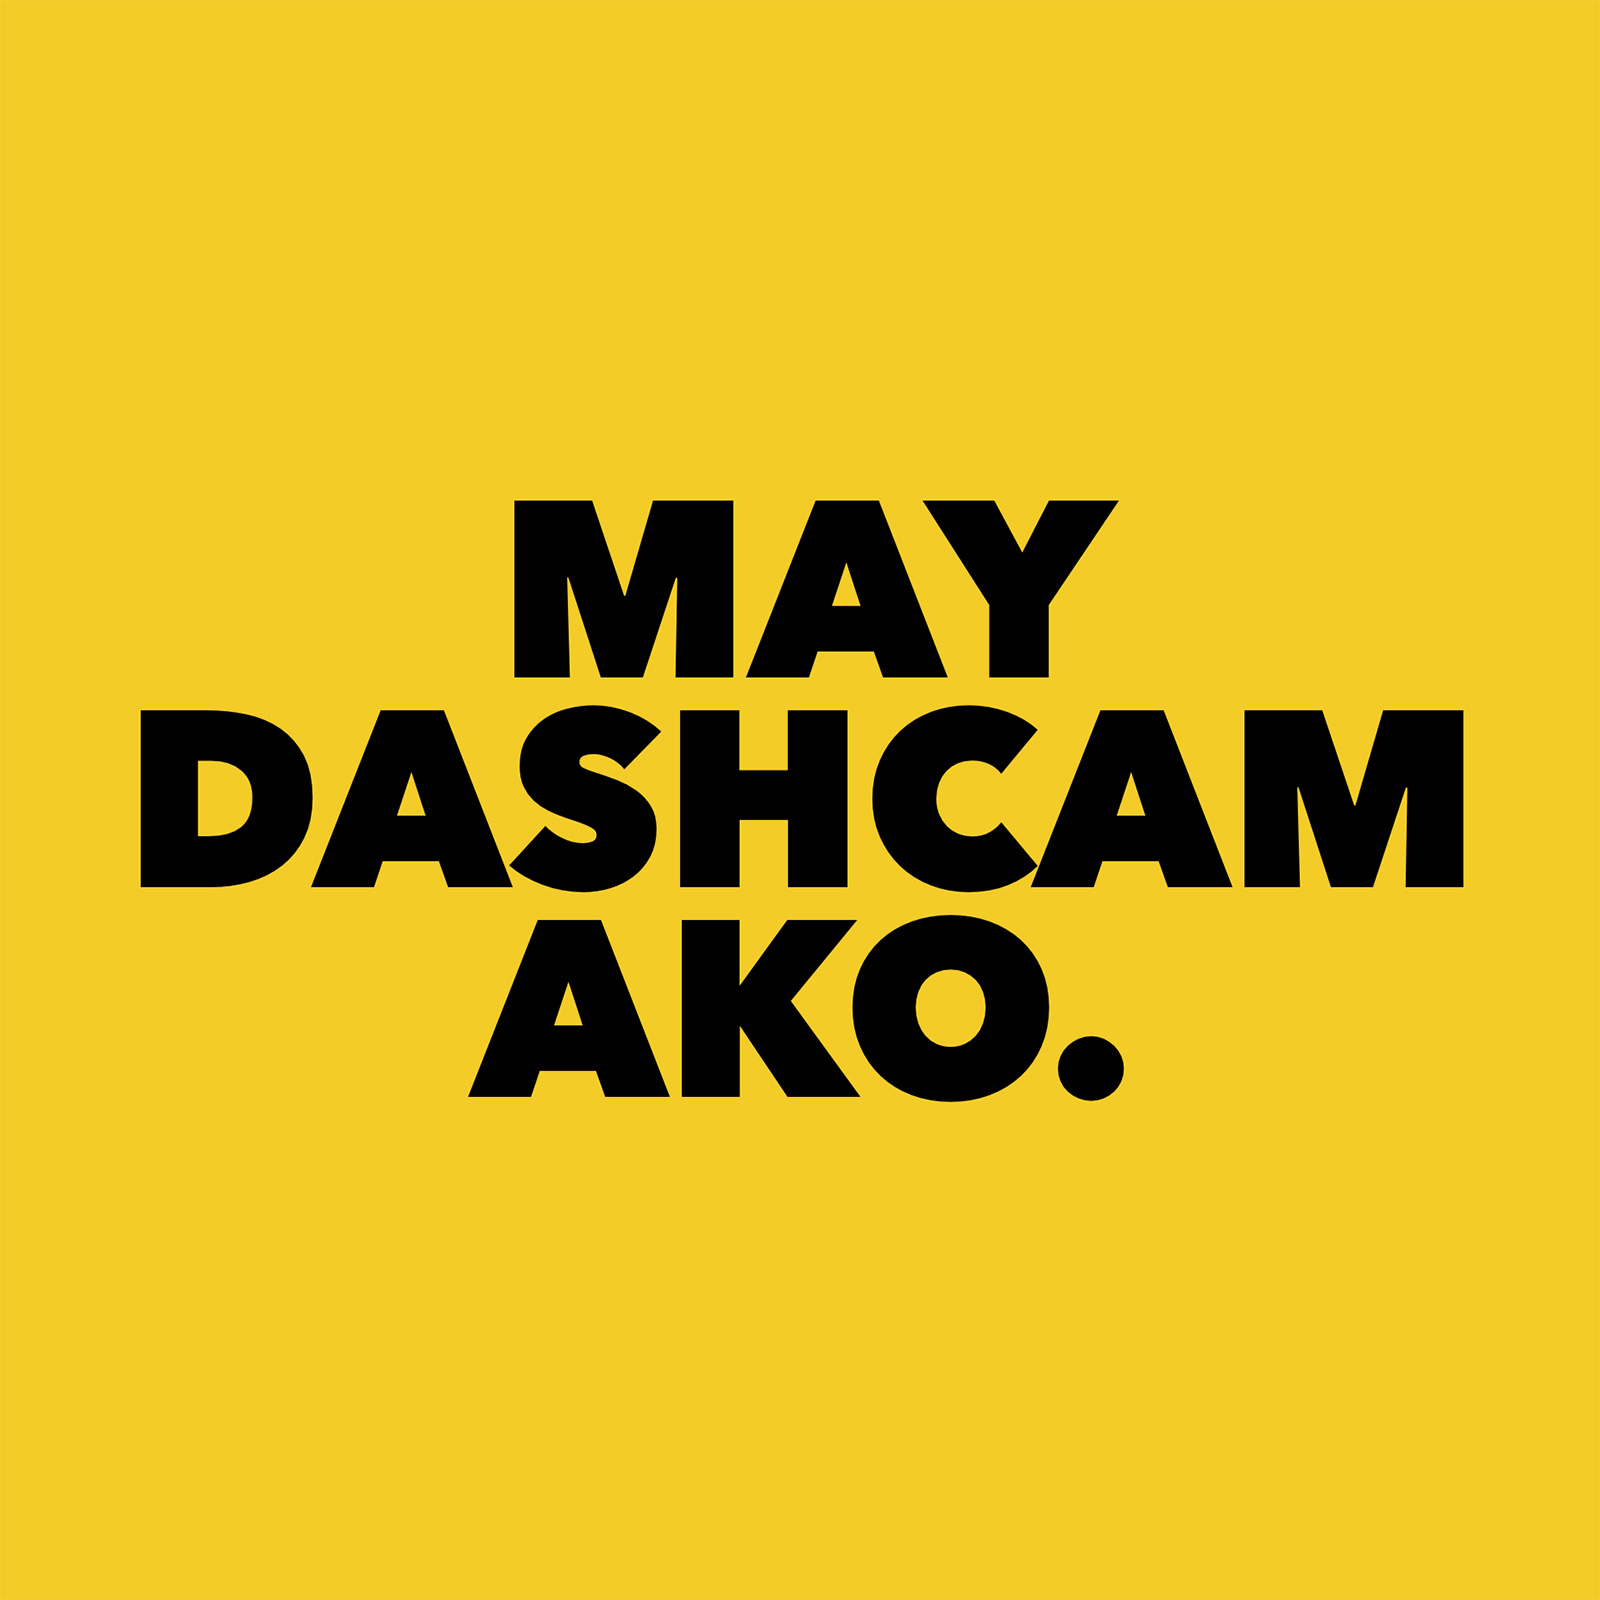 We need these ‘MAY DASHCAM AKO’ stickers on our cars